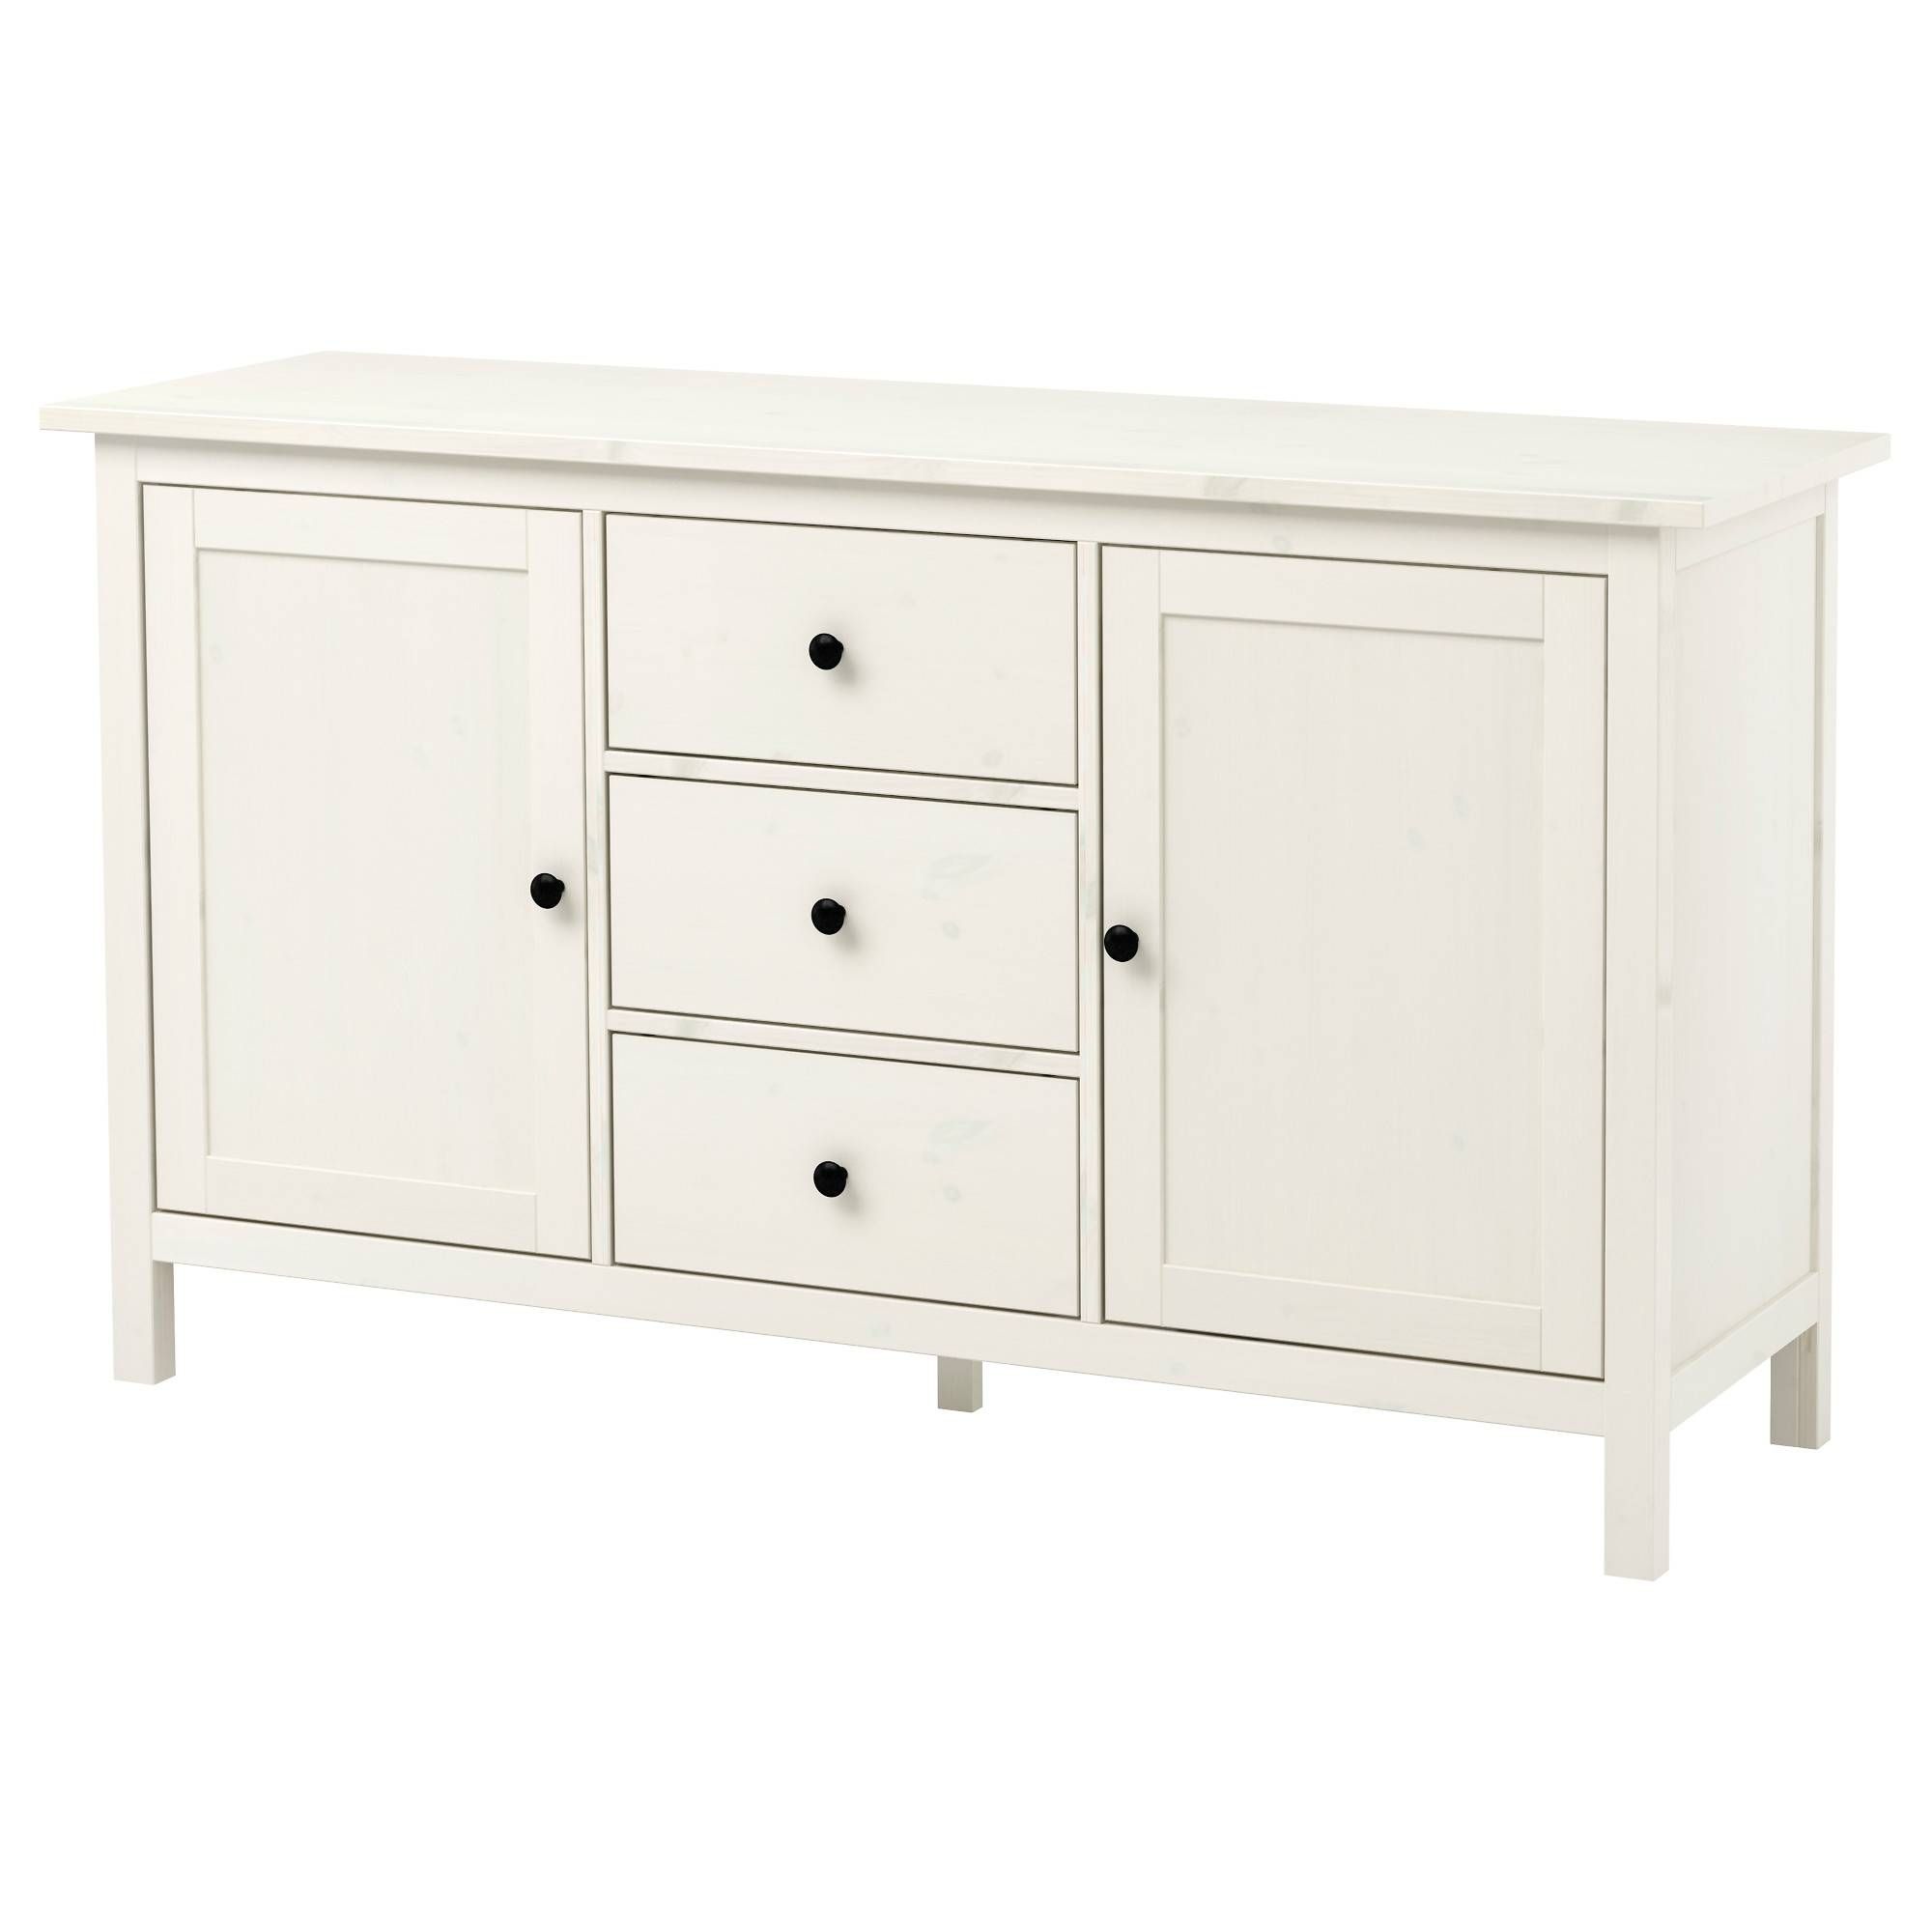 Hemnes Sideboard – White Stain – Ikea Within Most Current Sideboards And Tables (View 2 of 15)